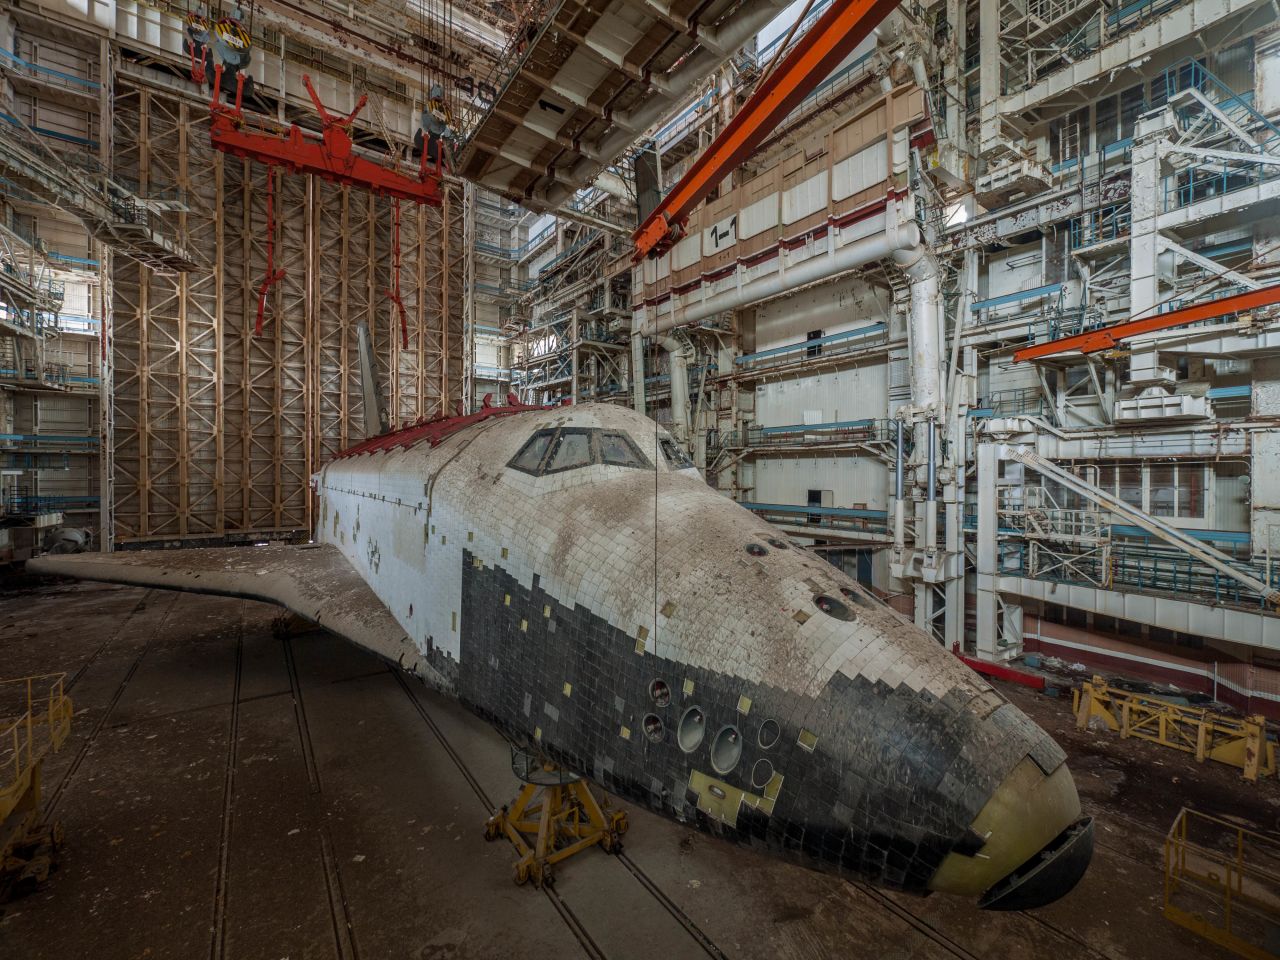 It's hard to imagine now, but this derelict shuttle was once at the gleaming forefront of the Soviet space program. It was one of a number of dilapidated spacecraft found at the Baikonur Cosmodrome site in Kazakhstan by urban explorer <a href="http://ralphmirebs.livejournal.com/" target="_blank" target="_blank">Ralph Mirebs. </a> 